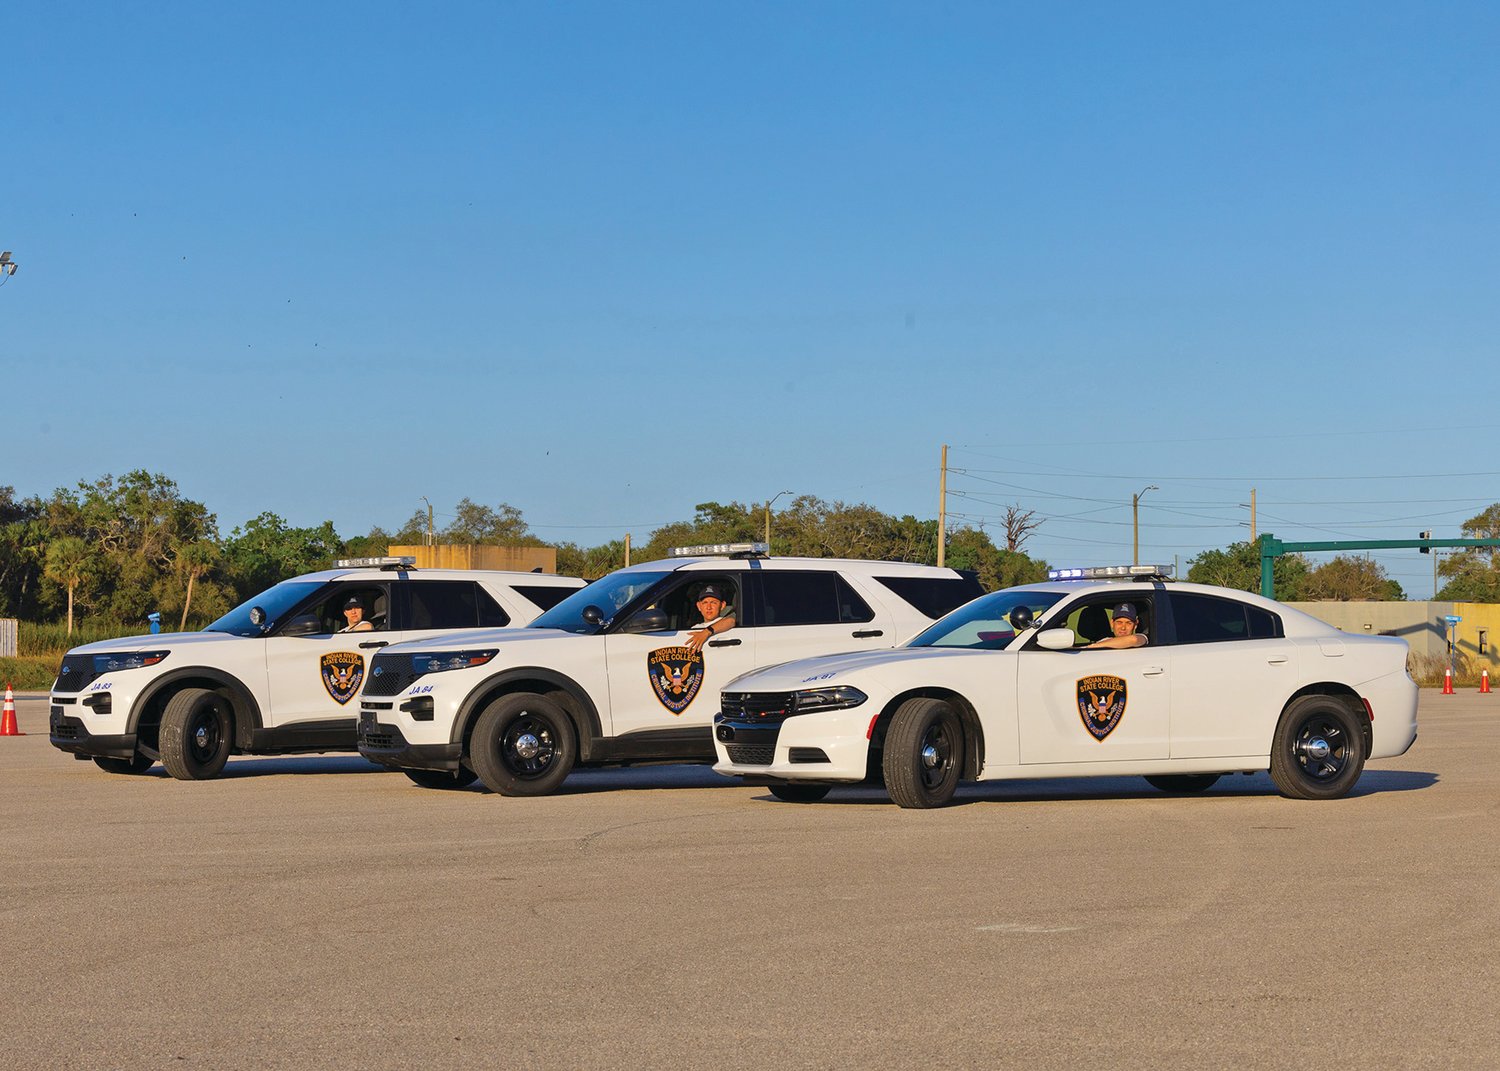 The IRSC Criminal Justice Institute has been gifted the funds to purchase three new squad cars to train cadets with. According to Criminal Justice Institute director Lisa Delong “It’s Very important that these students have the same vehicles that they will be using in the field”